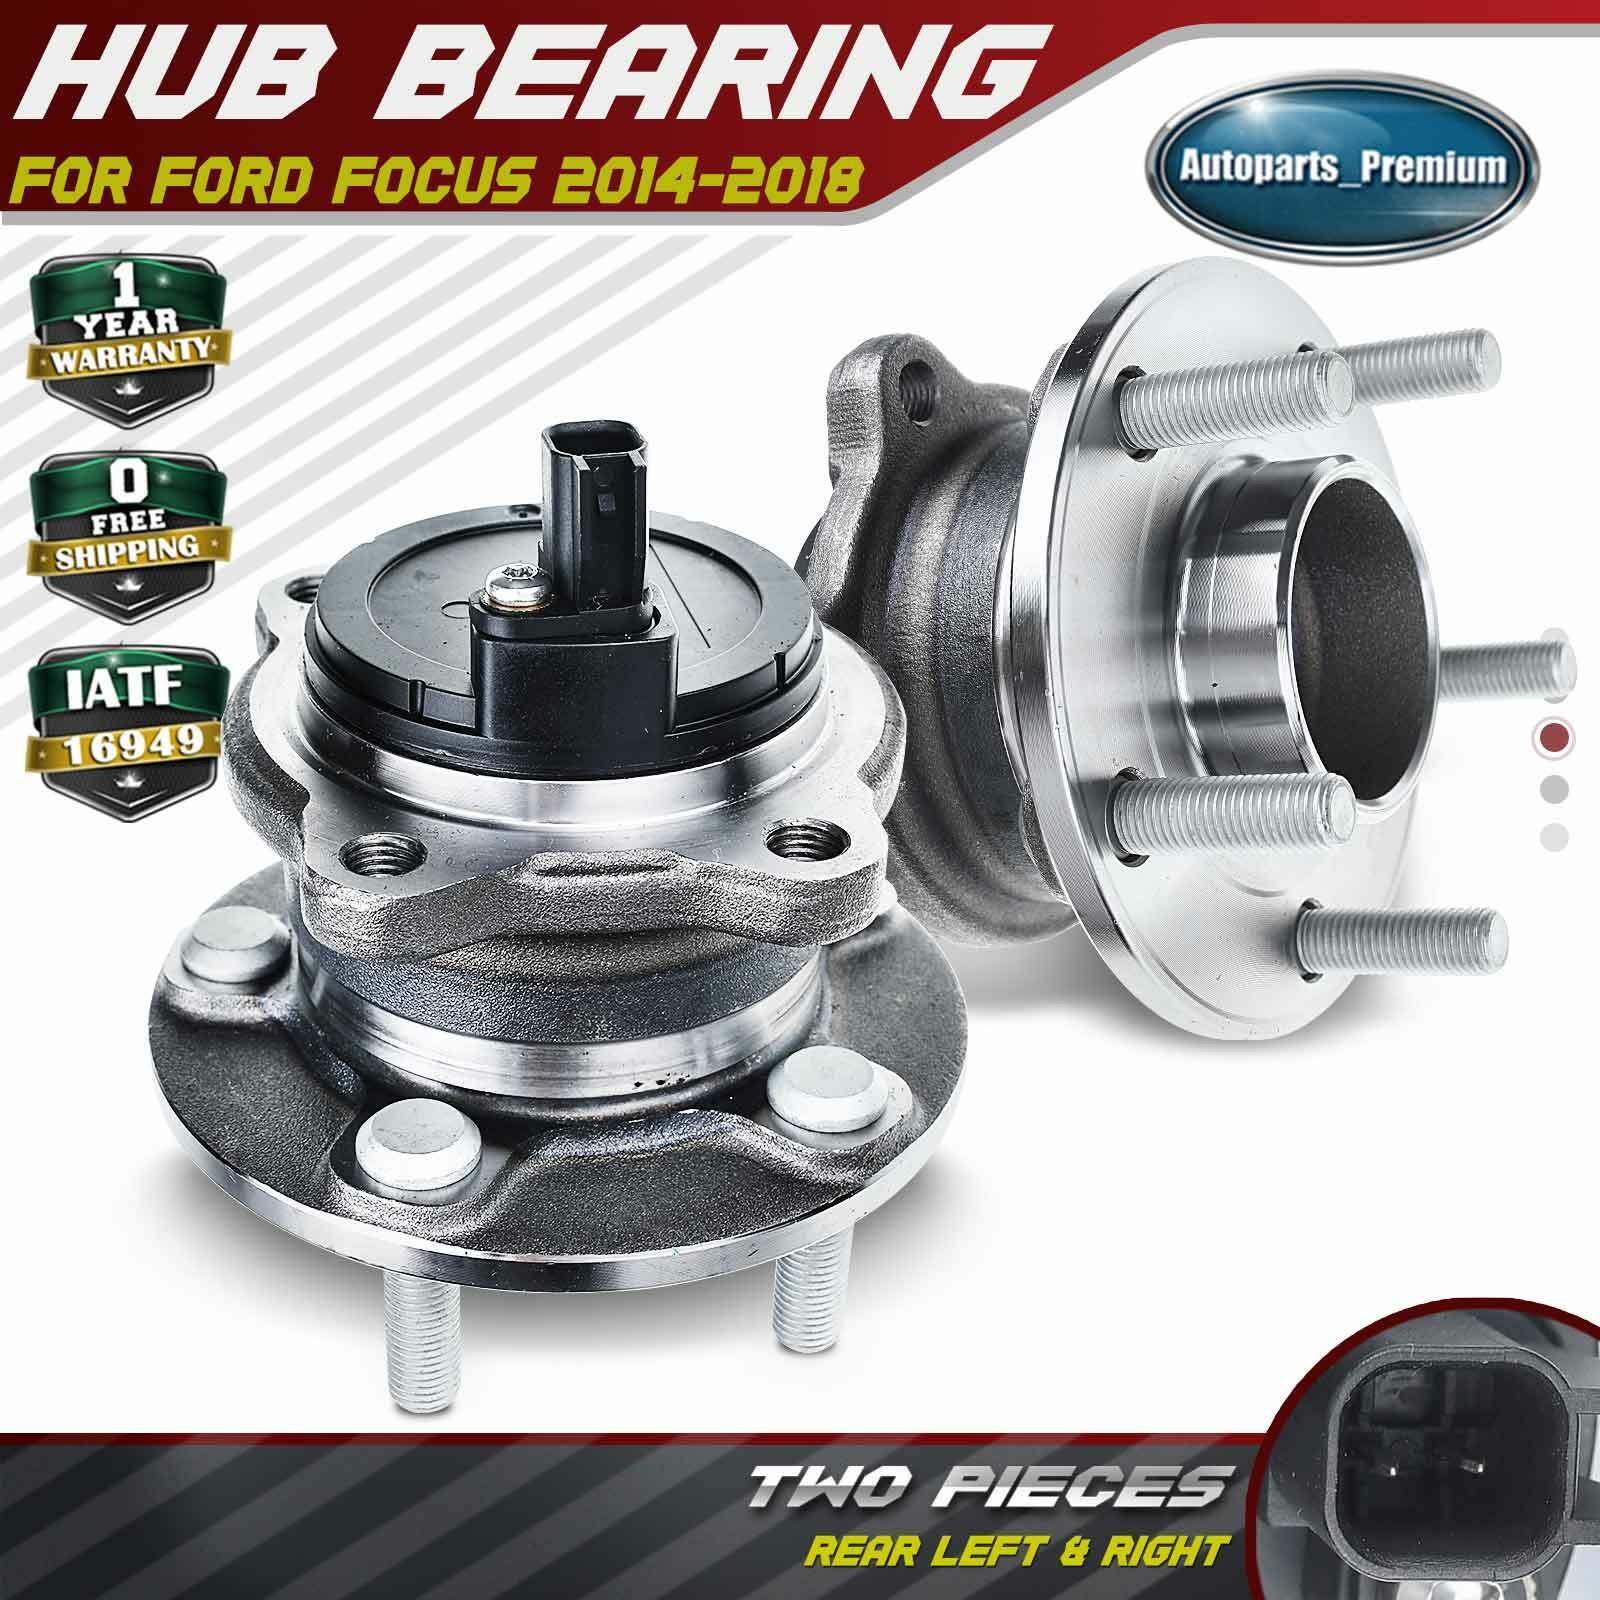 2xRear Left & Right Wheel Hub Bearing Assembly for Ford Focus 2014-2018 Electric